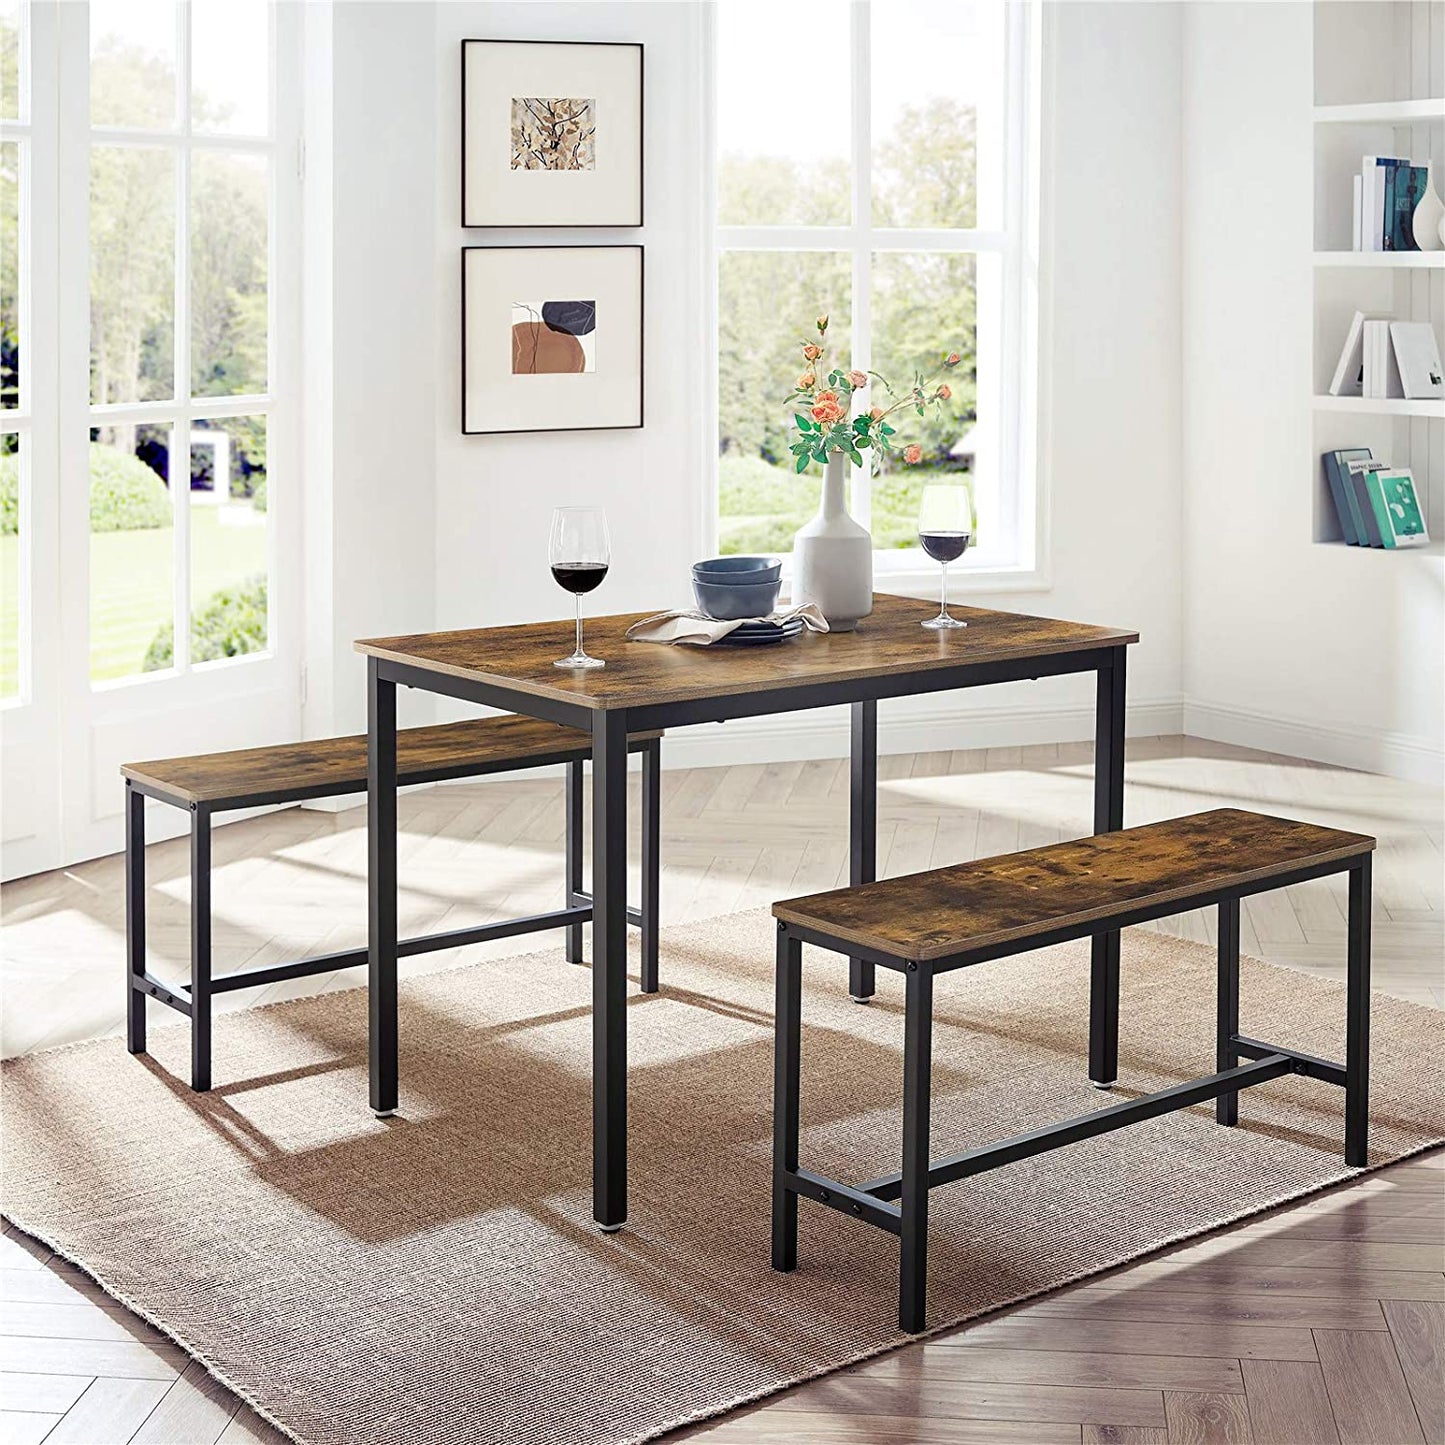 Dining Table with 2 Benches, 3 Pieces Set, Kitchen Table of 110 x 70 x 75 cm, 2 Benches of 97 x 30 x 50 cm Each, VASAGLE, 2